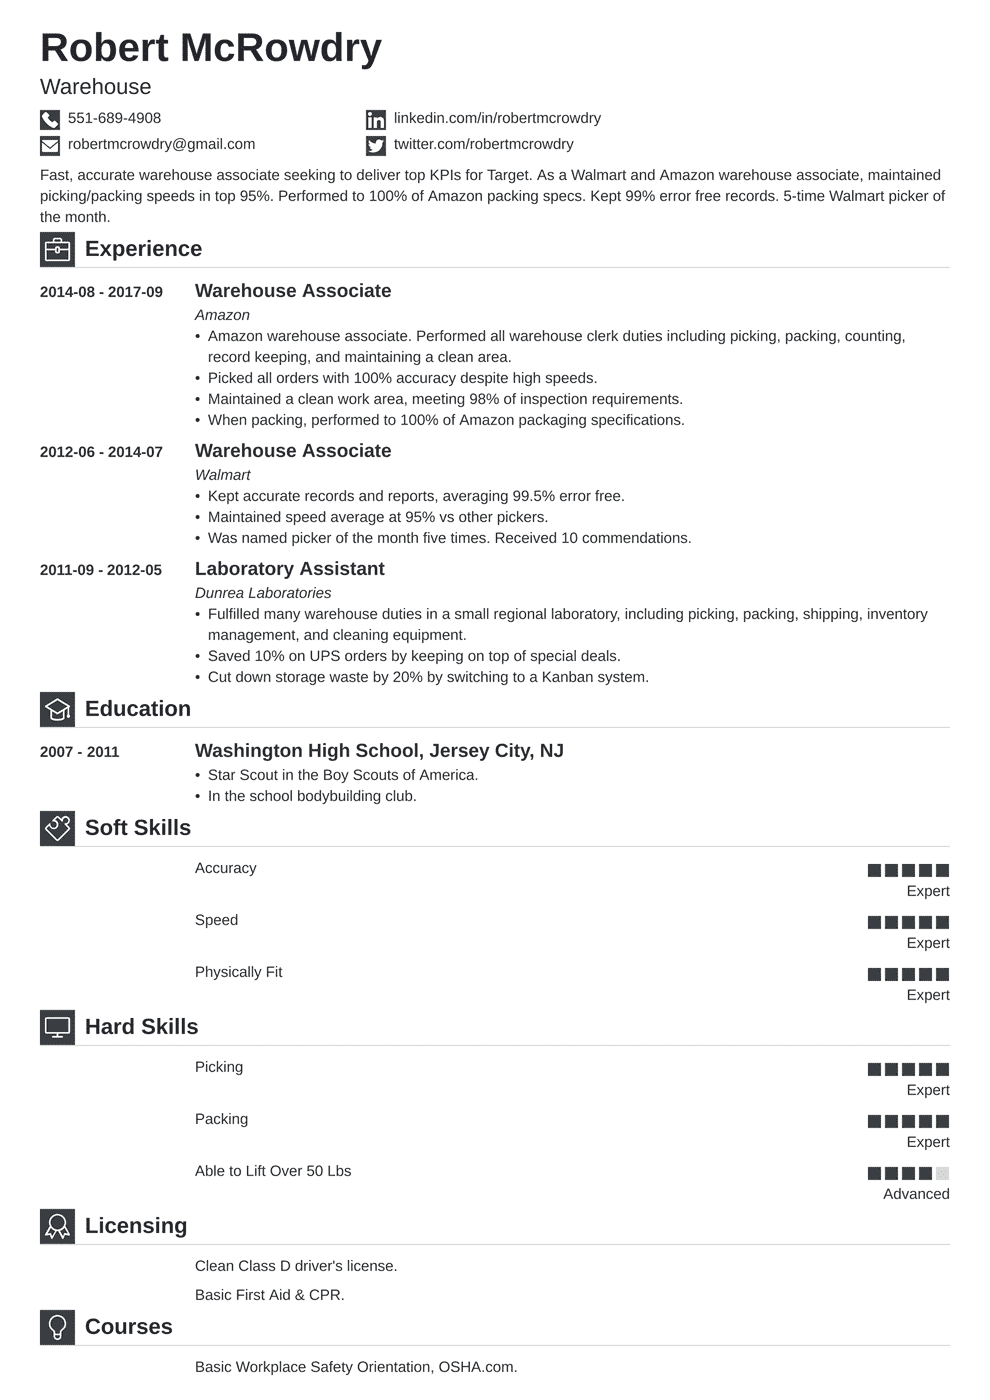 Warehouse Worker Resume Examples (+ Skills & More)